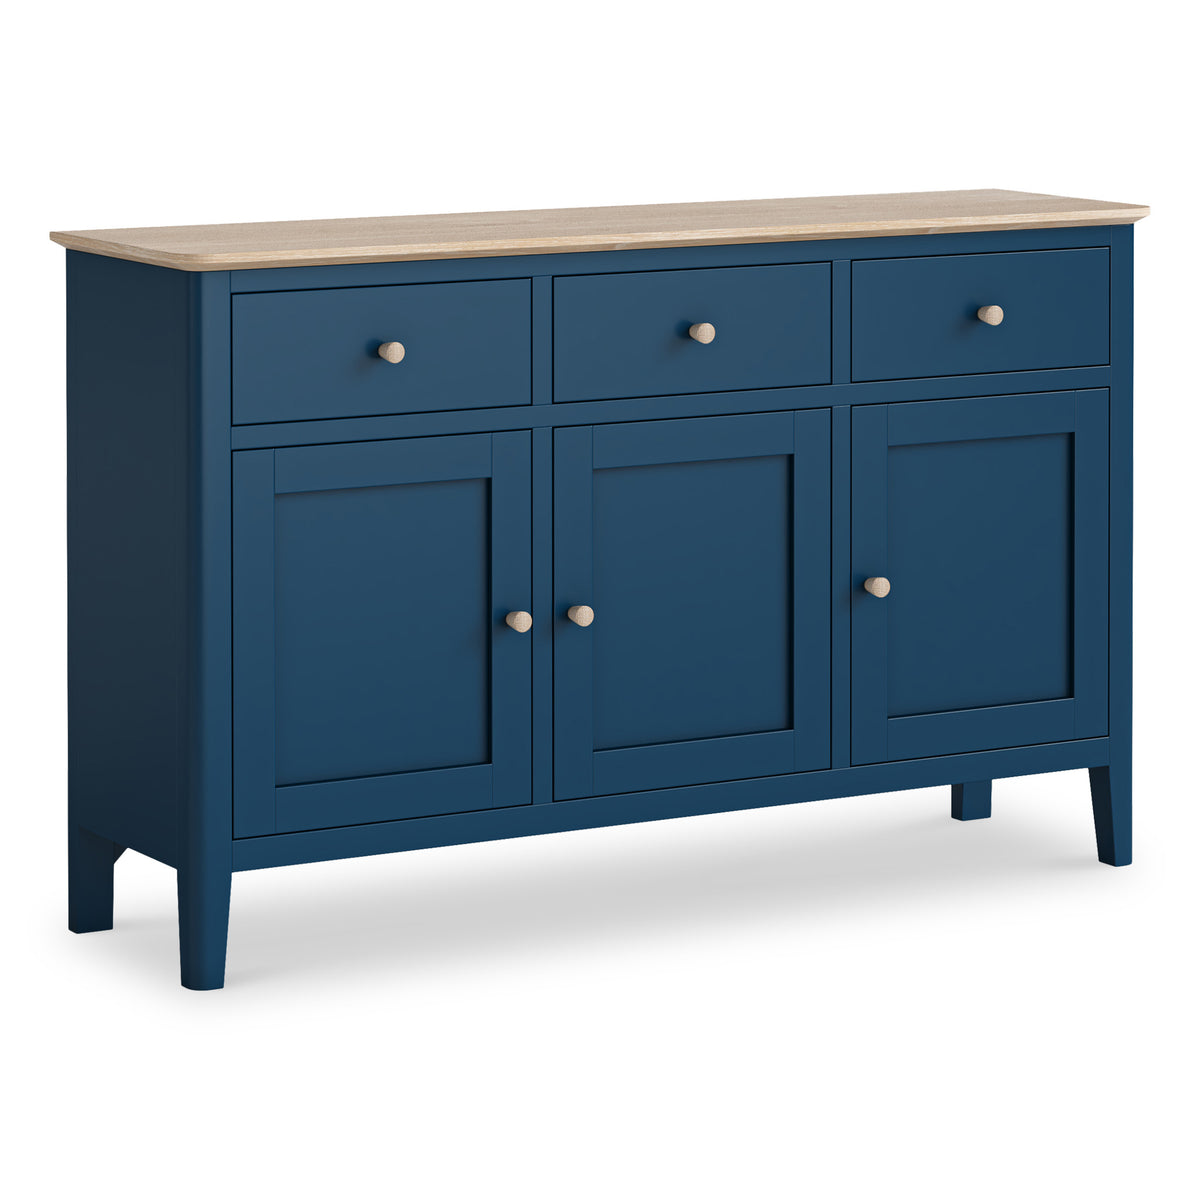 Penrose Navy Blue Large Sideboard with wooden handles from Roseland Furniture